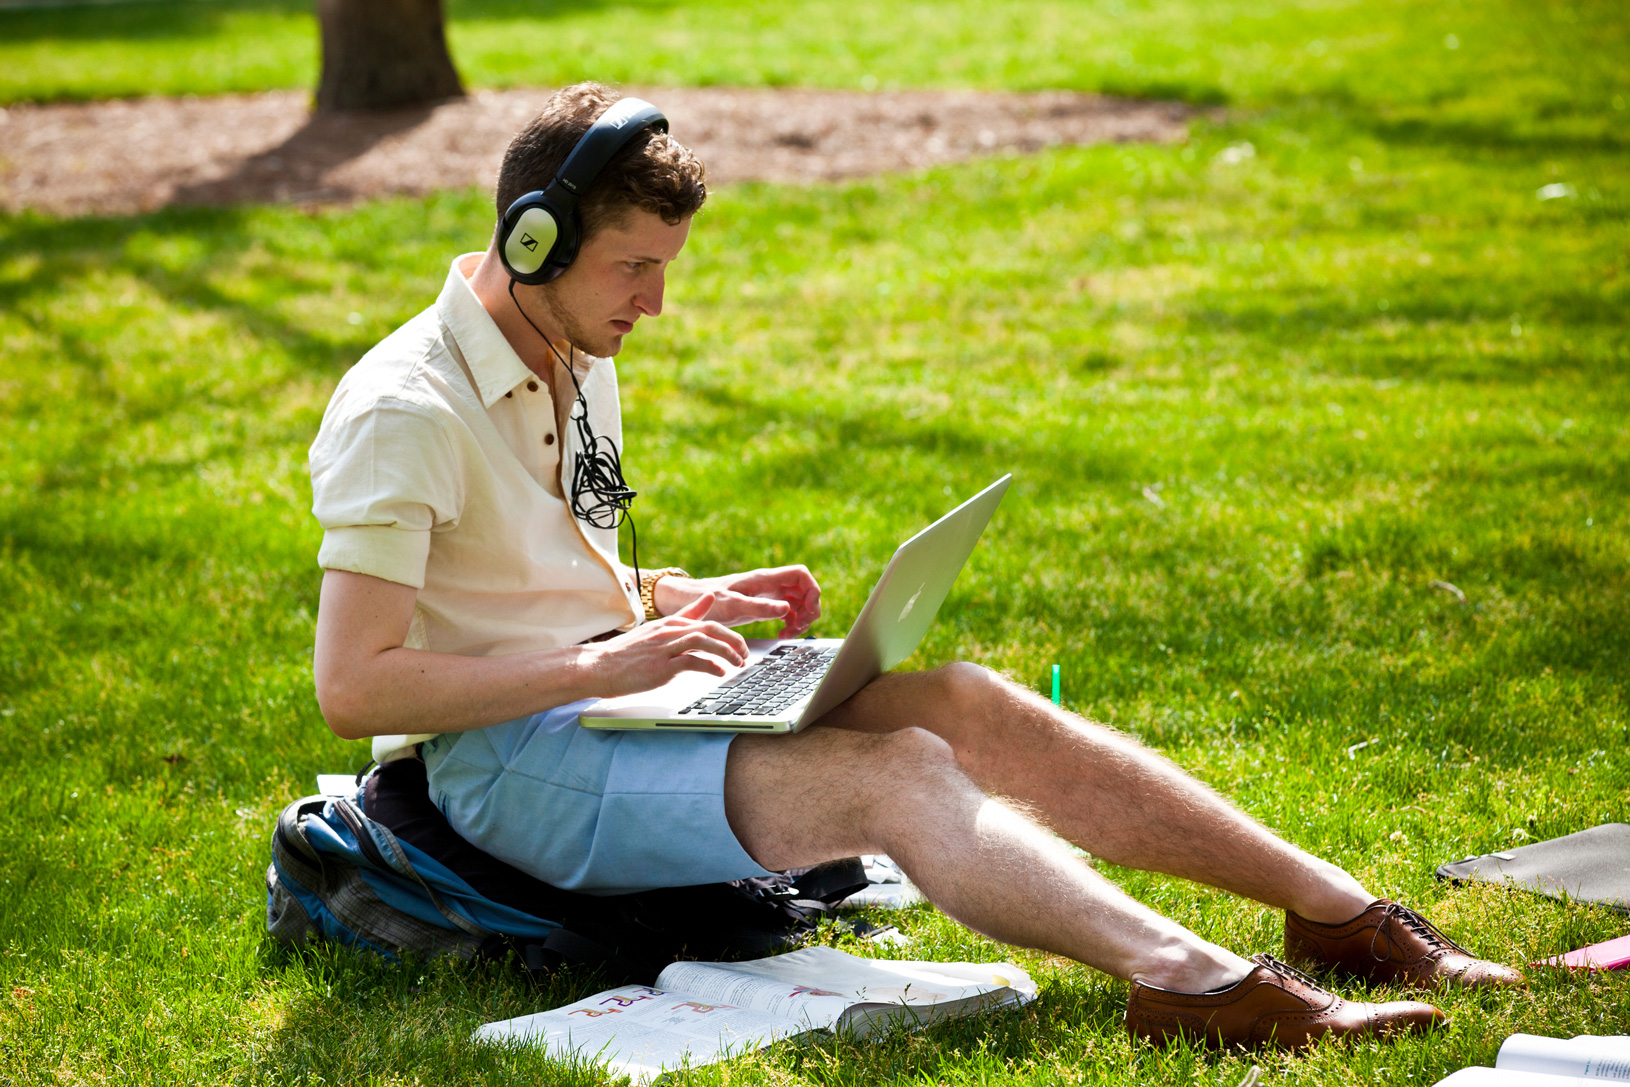 Student with laptop sitting on lawn